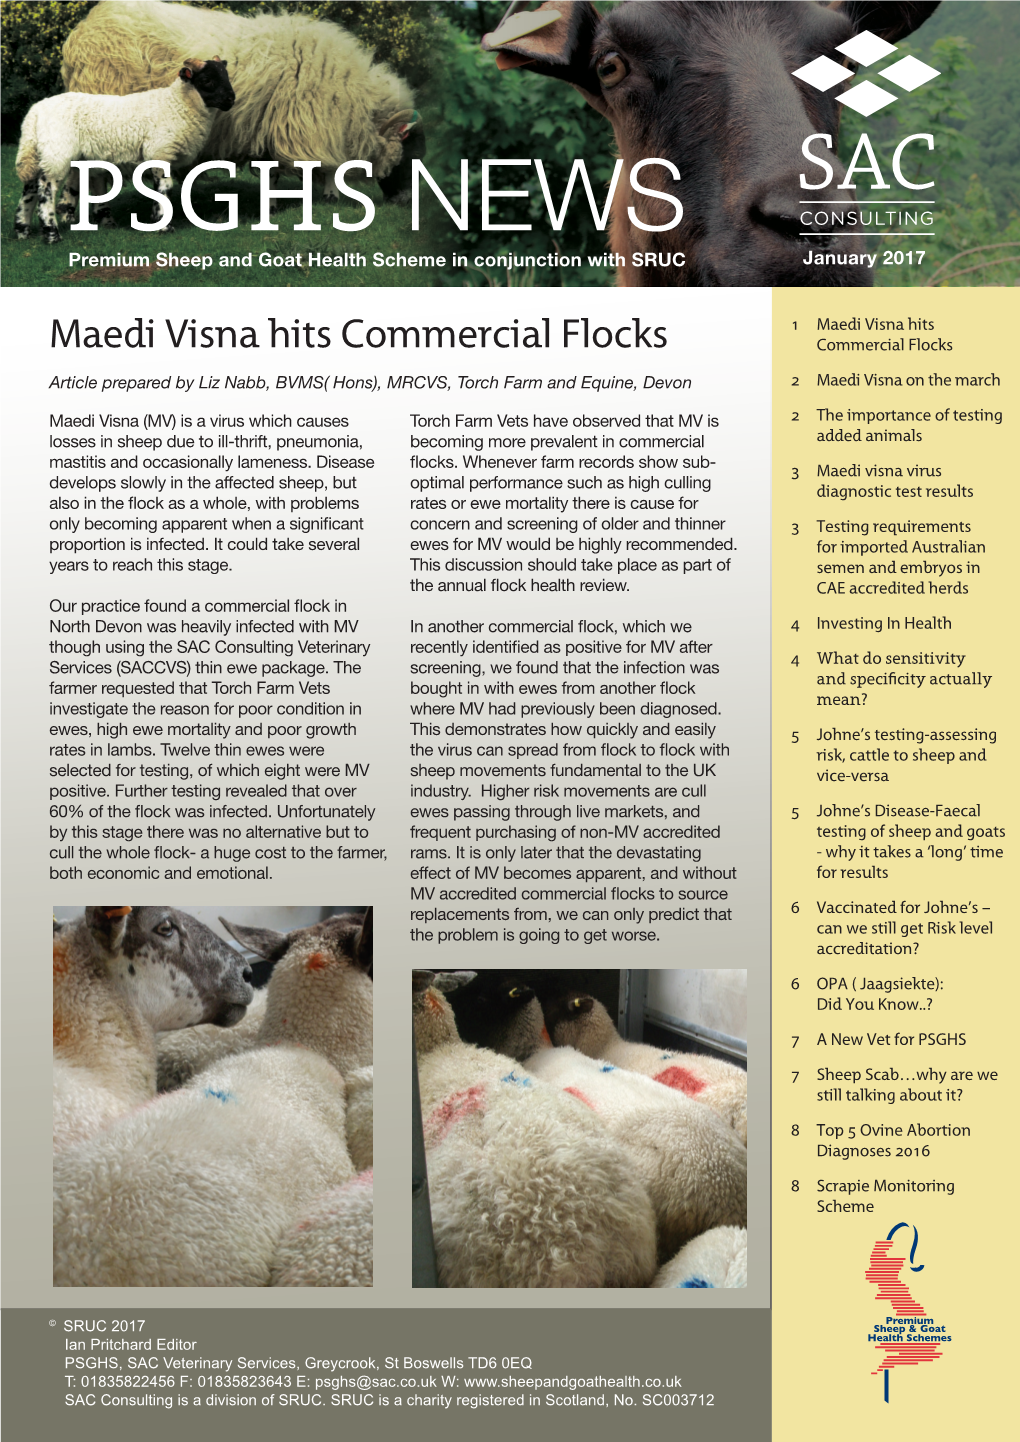 PSGHS NEWS January 2017 Premium Sheep and Goat Health Scheme in Conjunction with SRUC